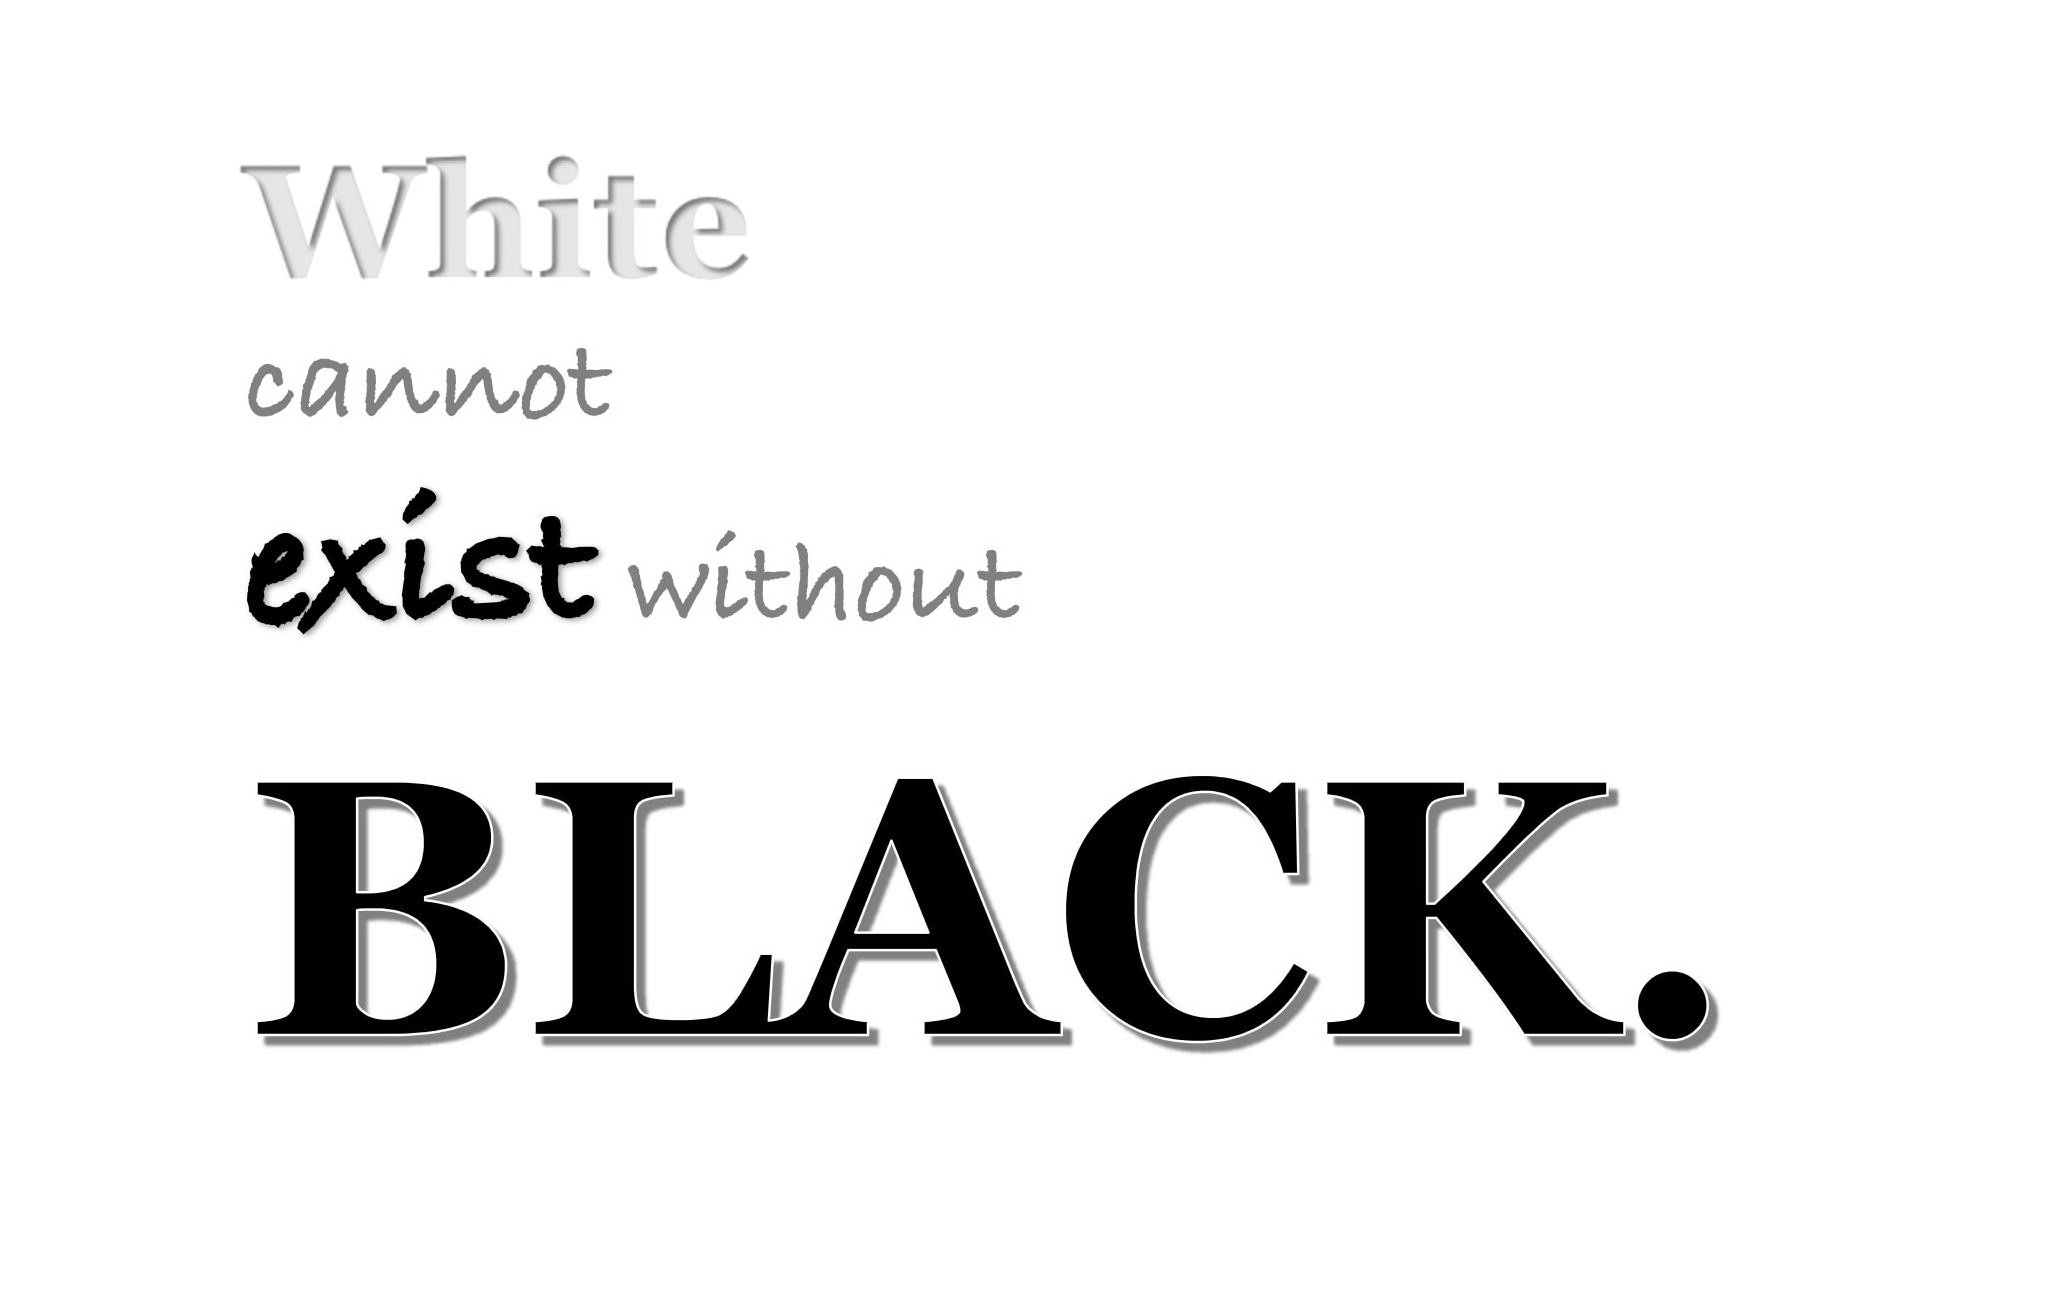  WHITE CANNOT EXIST WITHOUT BLACK.